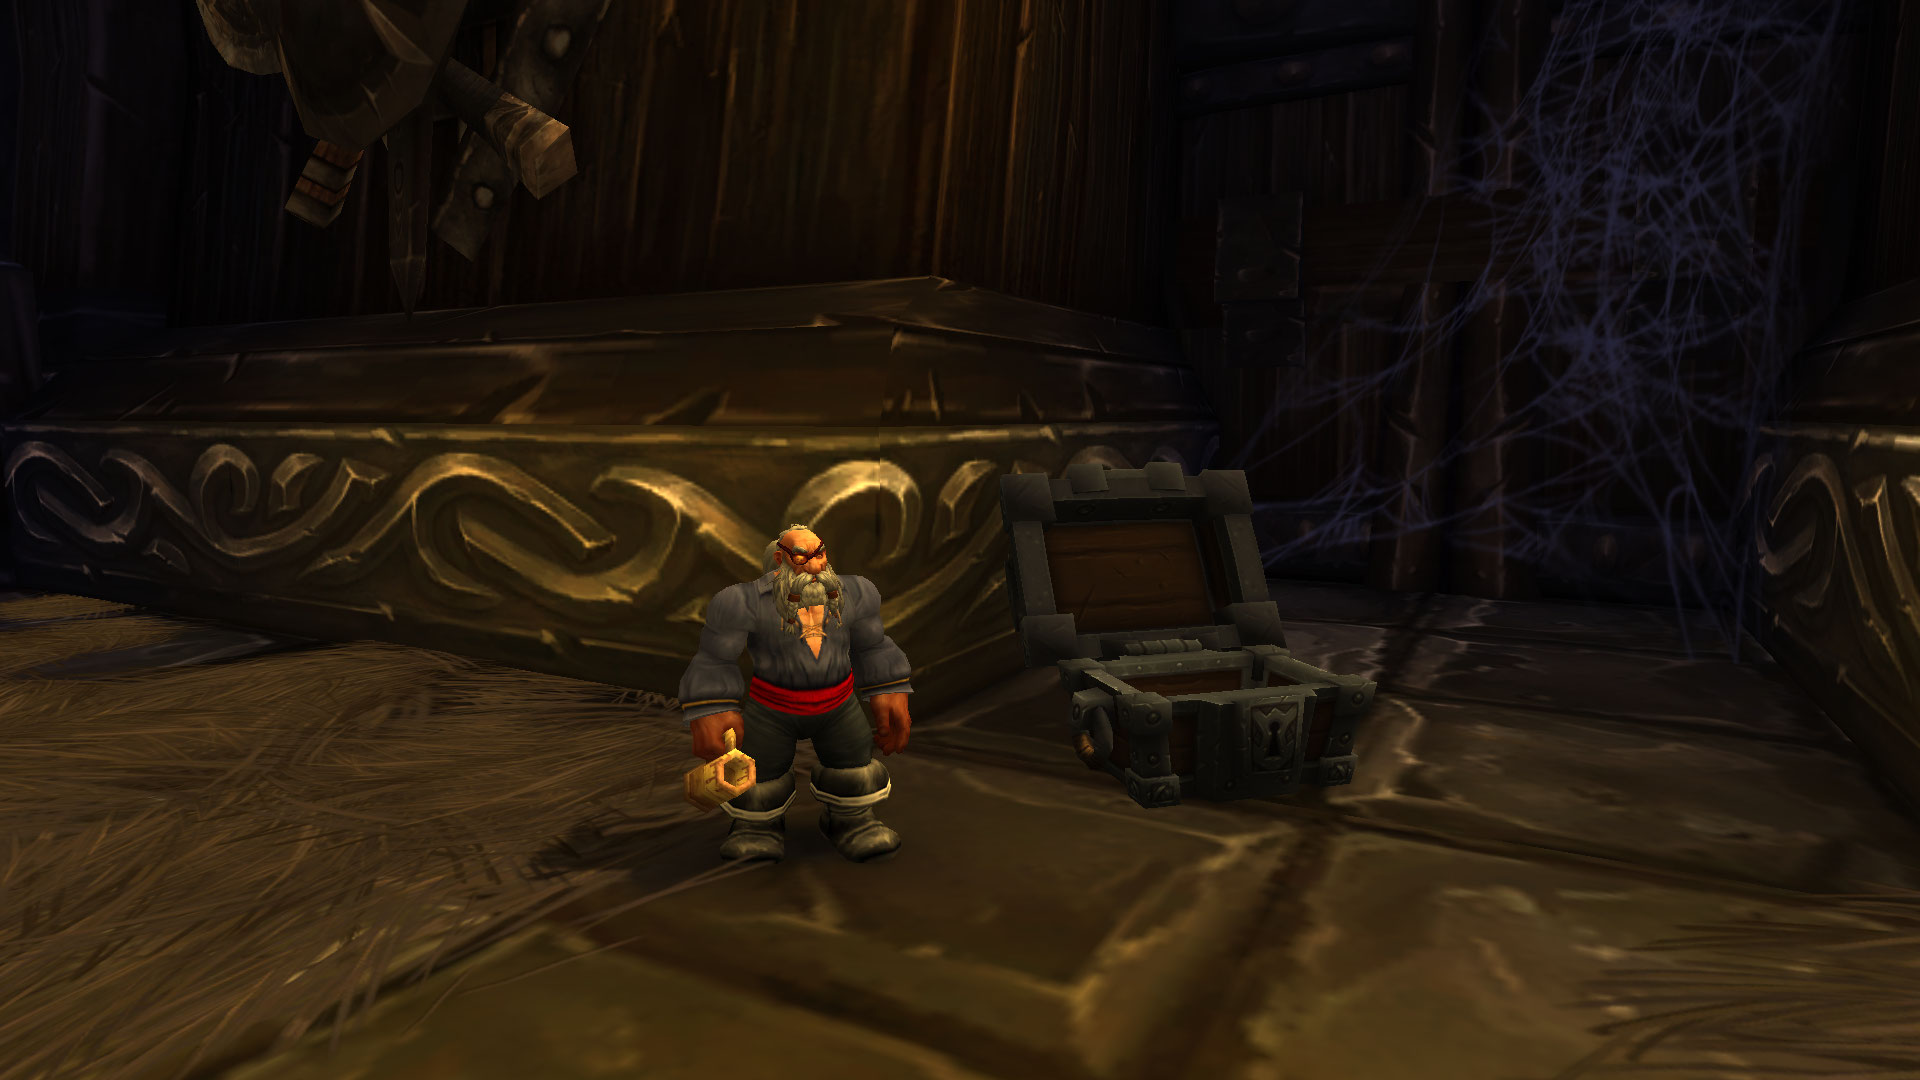 WoW Dwarf and the Chest